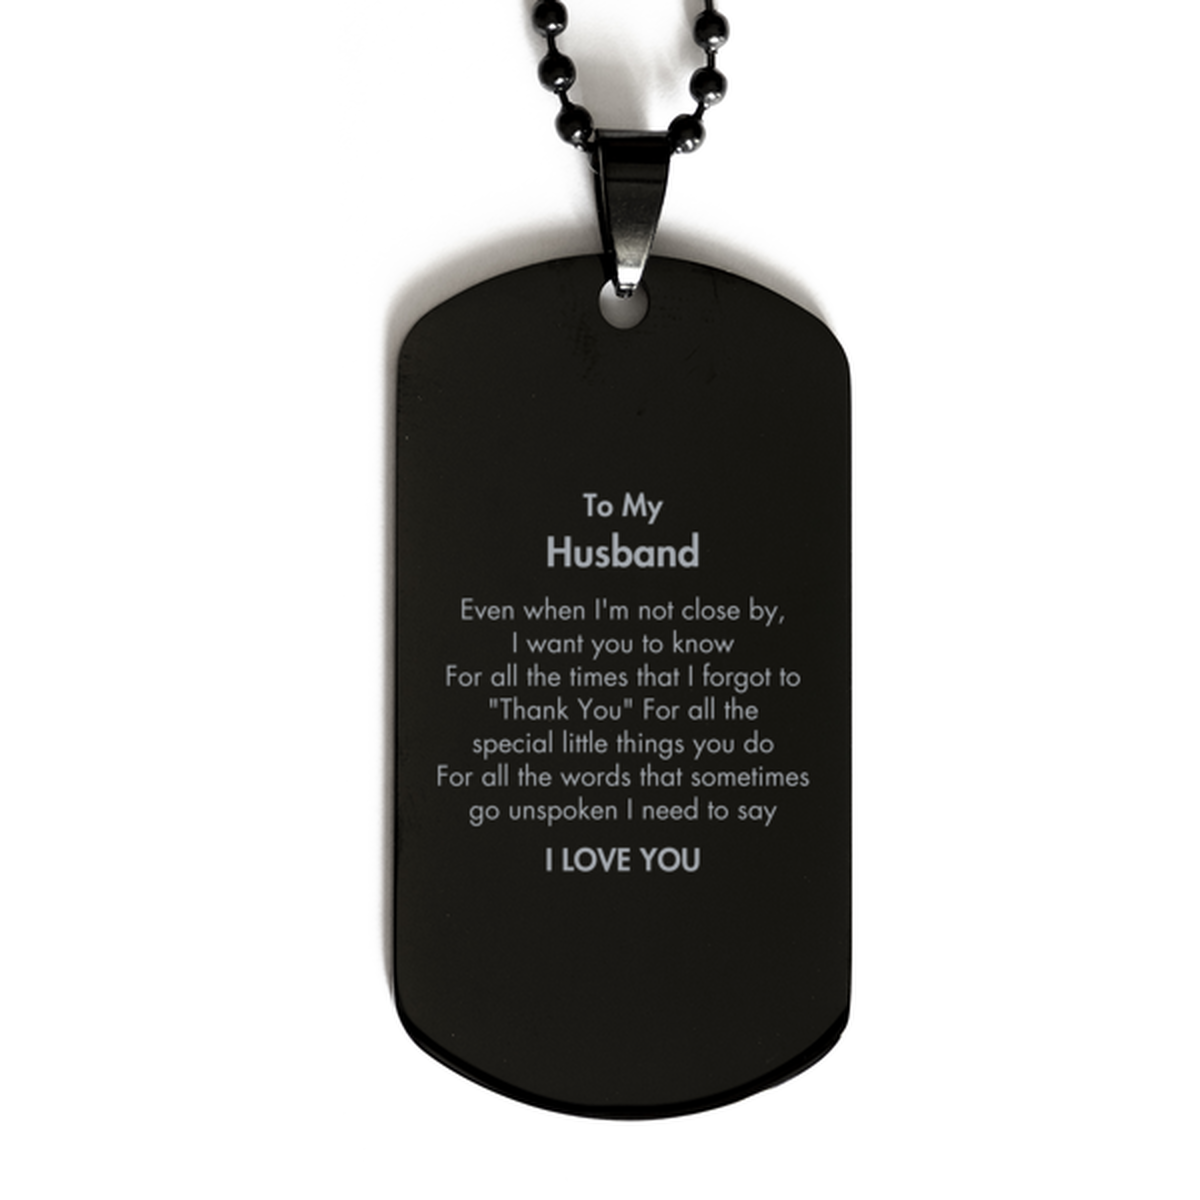 Thank You Gifts for Husband, Keepsake Black Dog Tag Gifts for Husband Birthday Mother's day Father's Day Husband For all the words That sometimes go unspoken I need to say I LOVE YOU